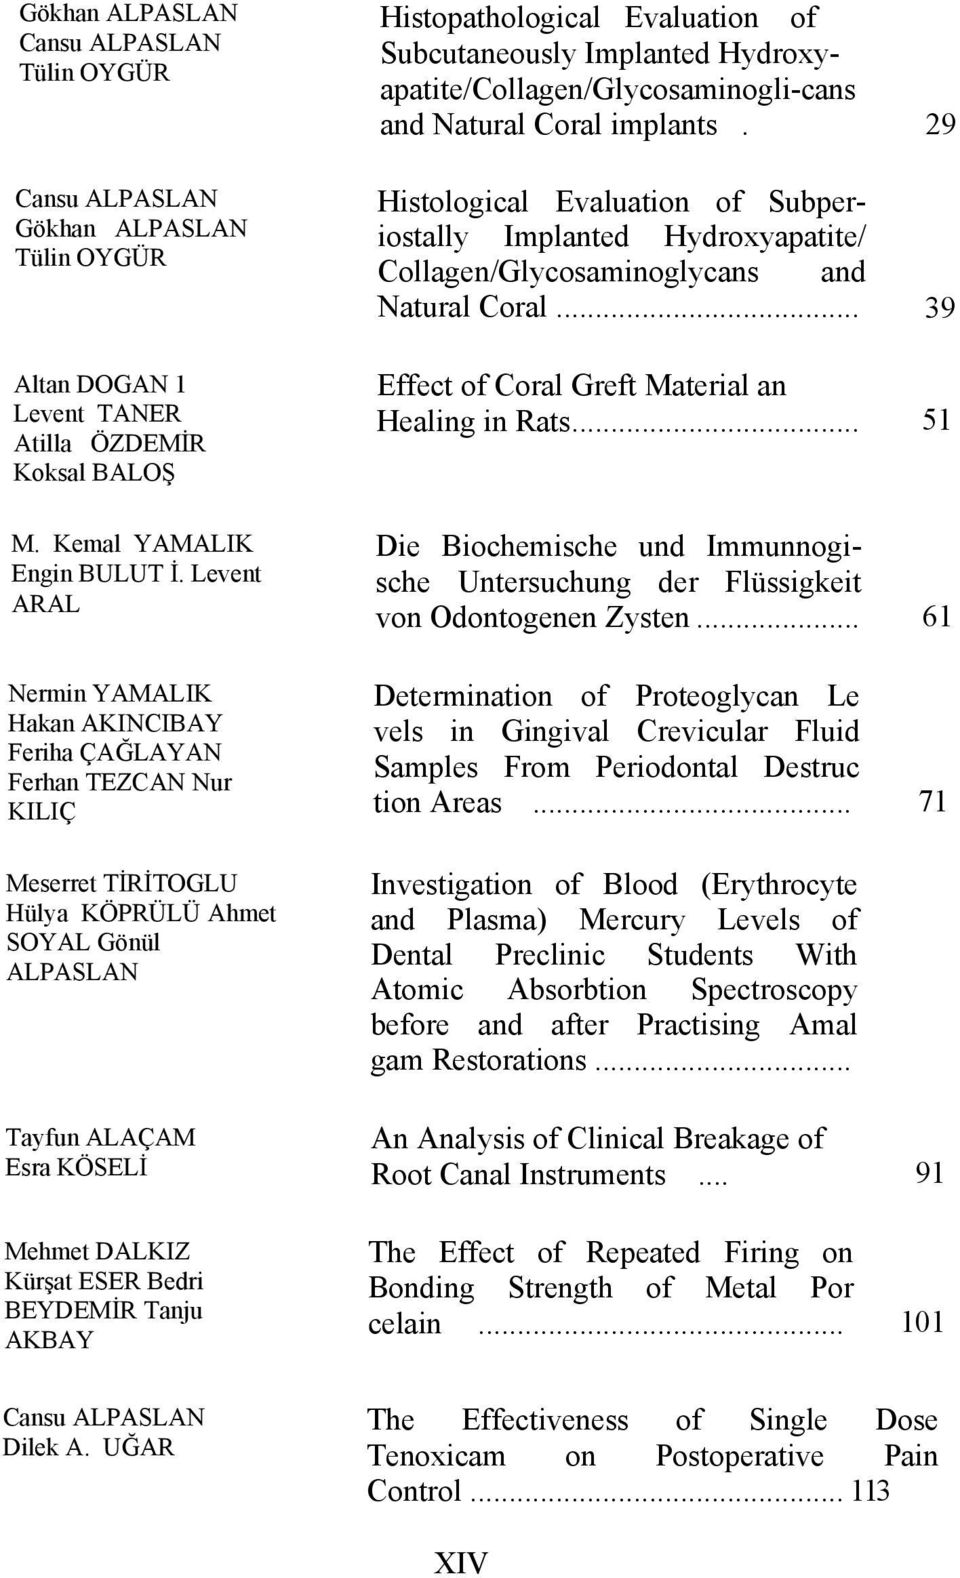 Bedri BEYDEMİR Tanju AKBAY Histopathological Evaluation of Subcutaneously Implanted Hydroxyapatite/Collagen/Glycosaminogli-cans and Natural Coral implants.